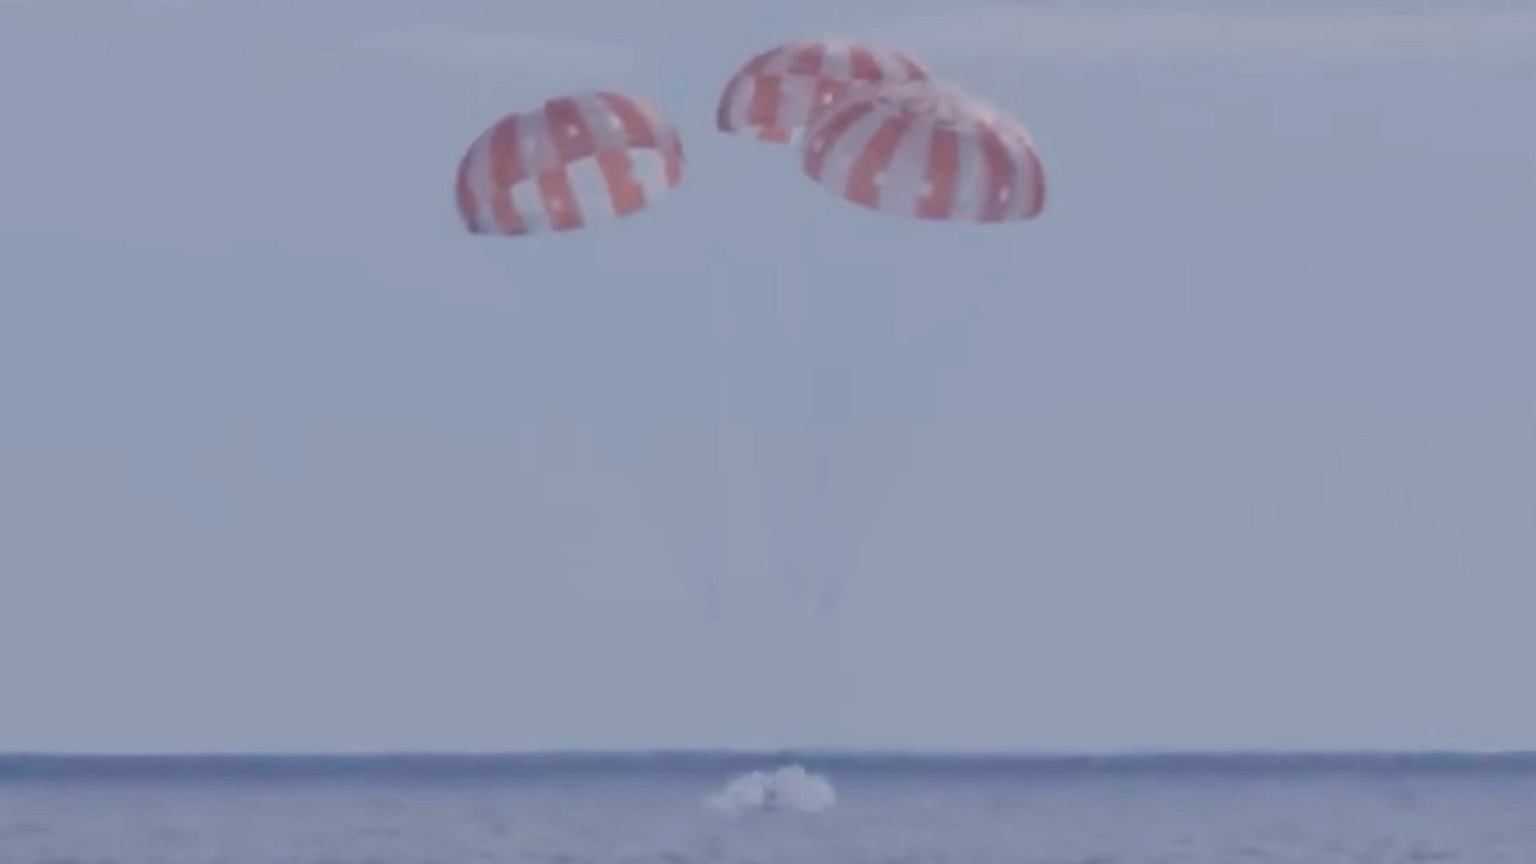 Artemis mission.  The Orion capsule has successfully returned to Earth.  "She's already home."